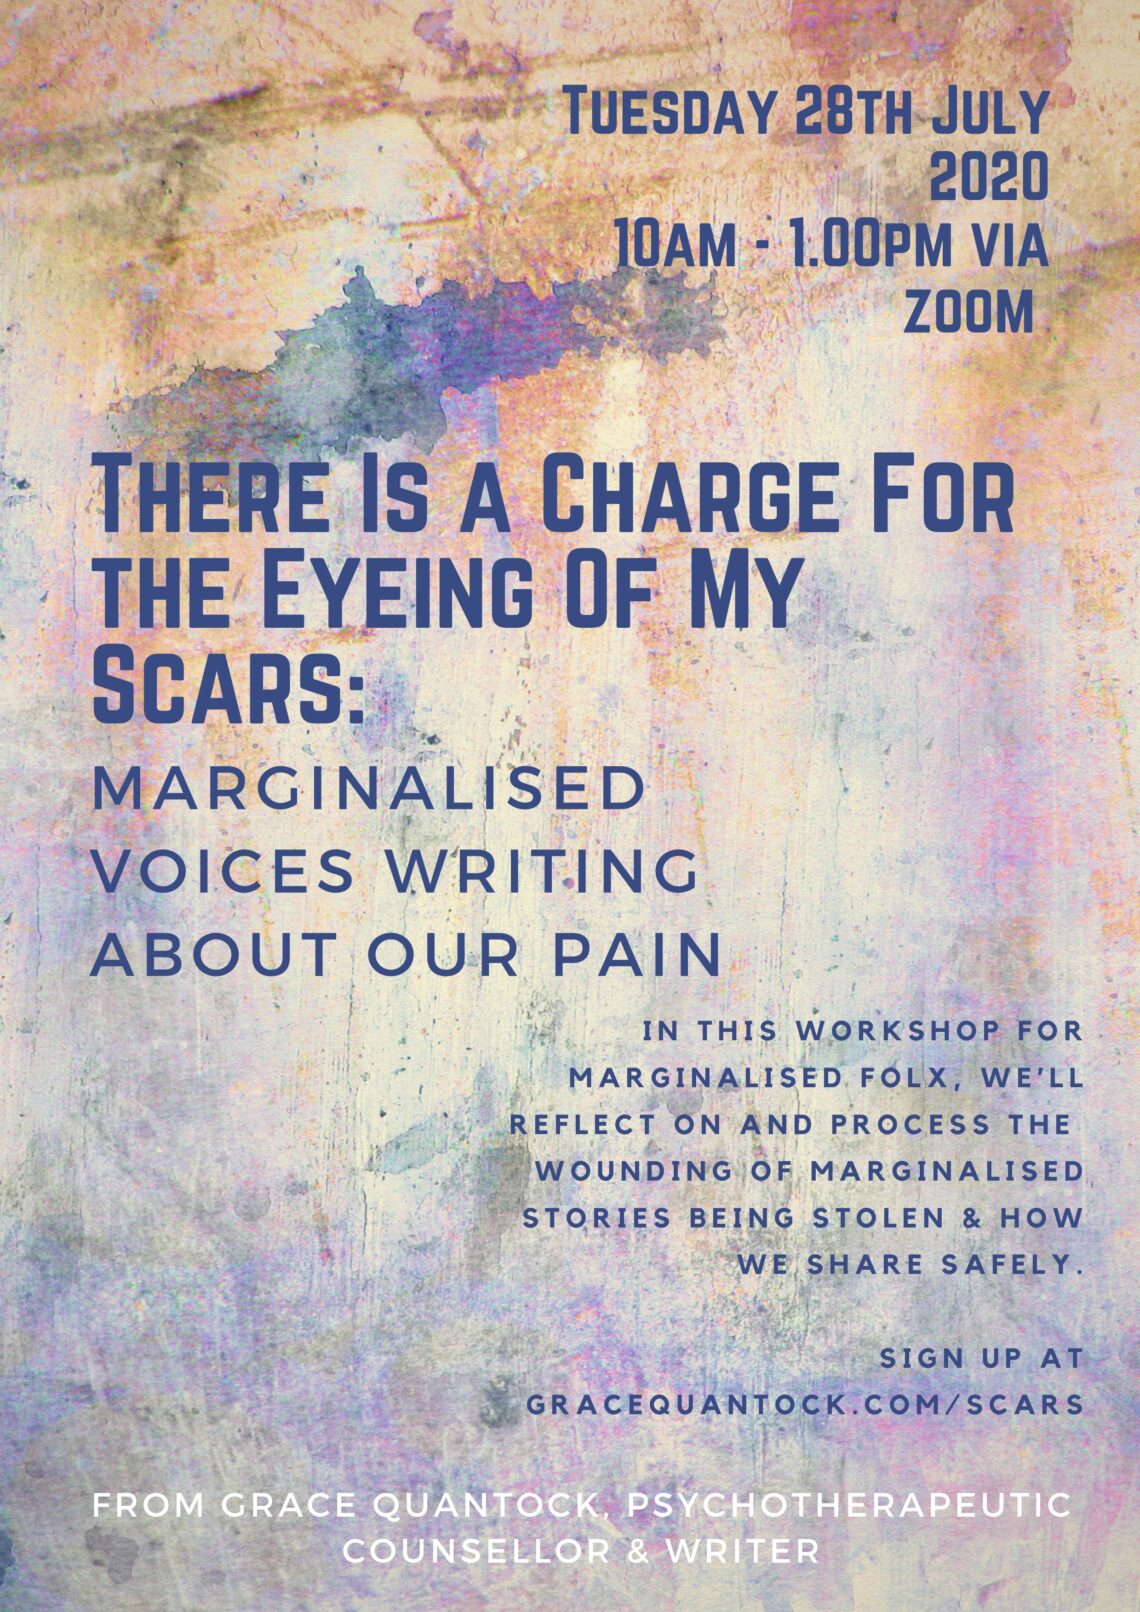 There is a charge for the eyeing of my scars, marginalised voices writing about our pain. Tuesday 28th July 2020. 10am to 1pm via Zoom. Transcripts will be available after the class.